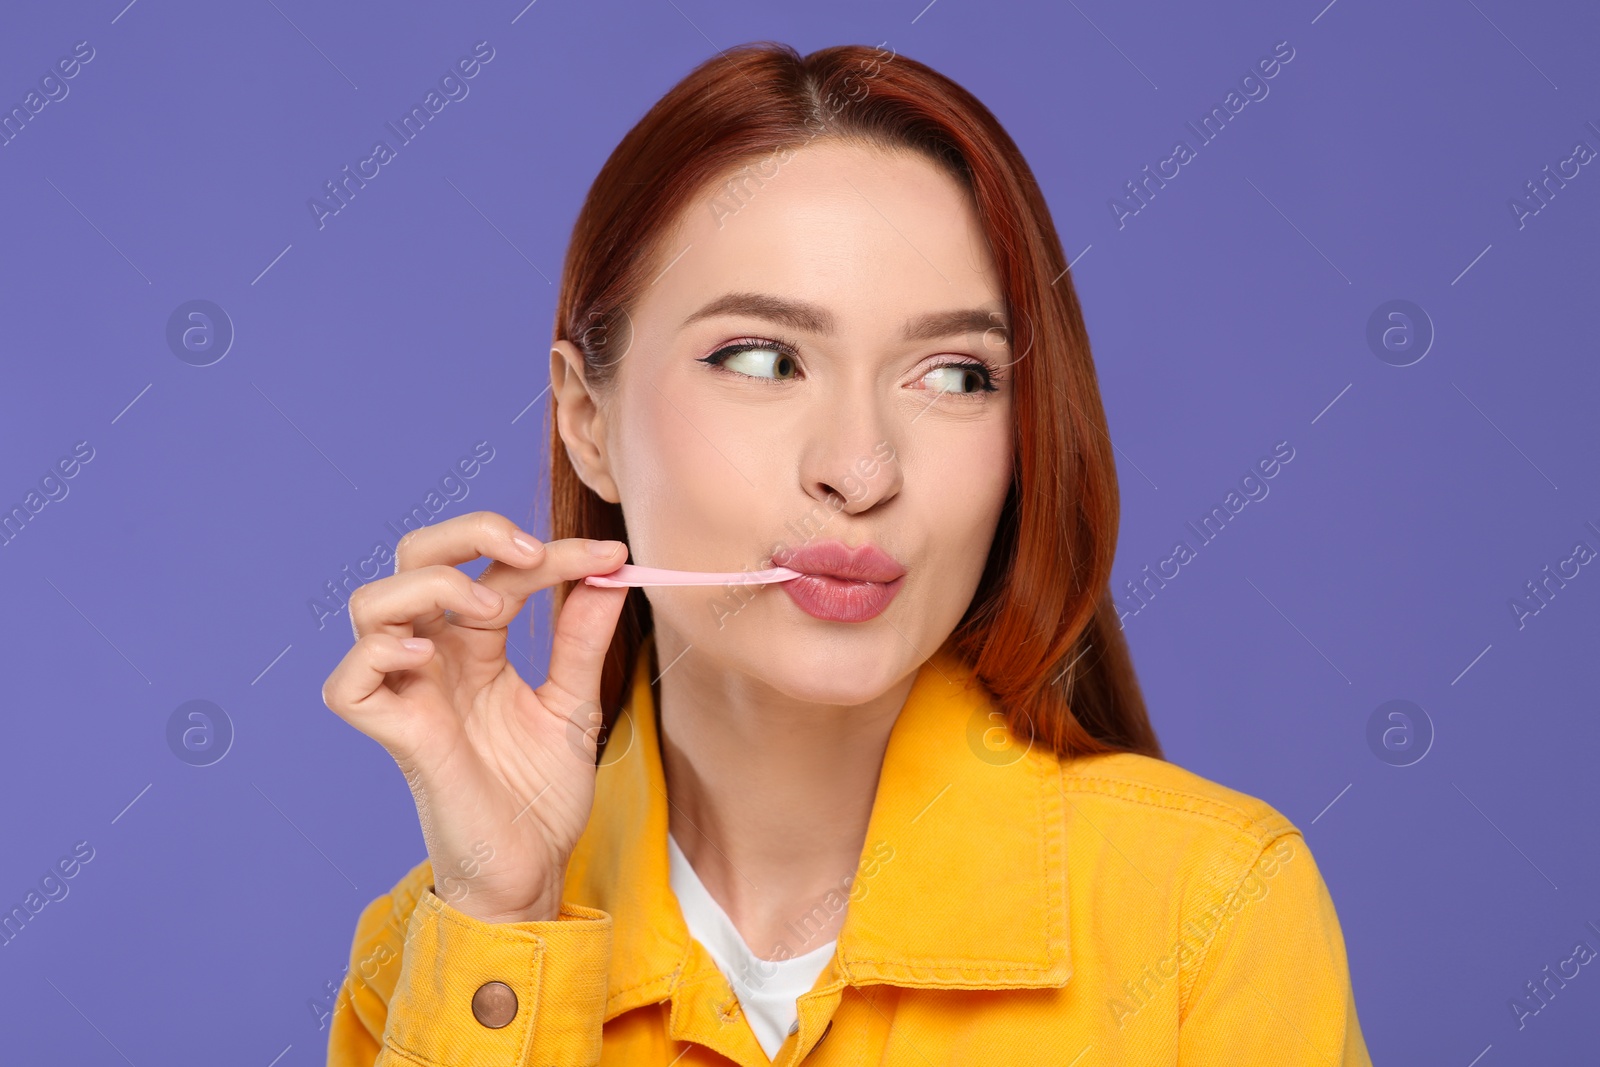 Photo of Beautiful woman chewing bubble gum on purple background